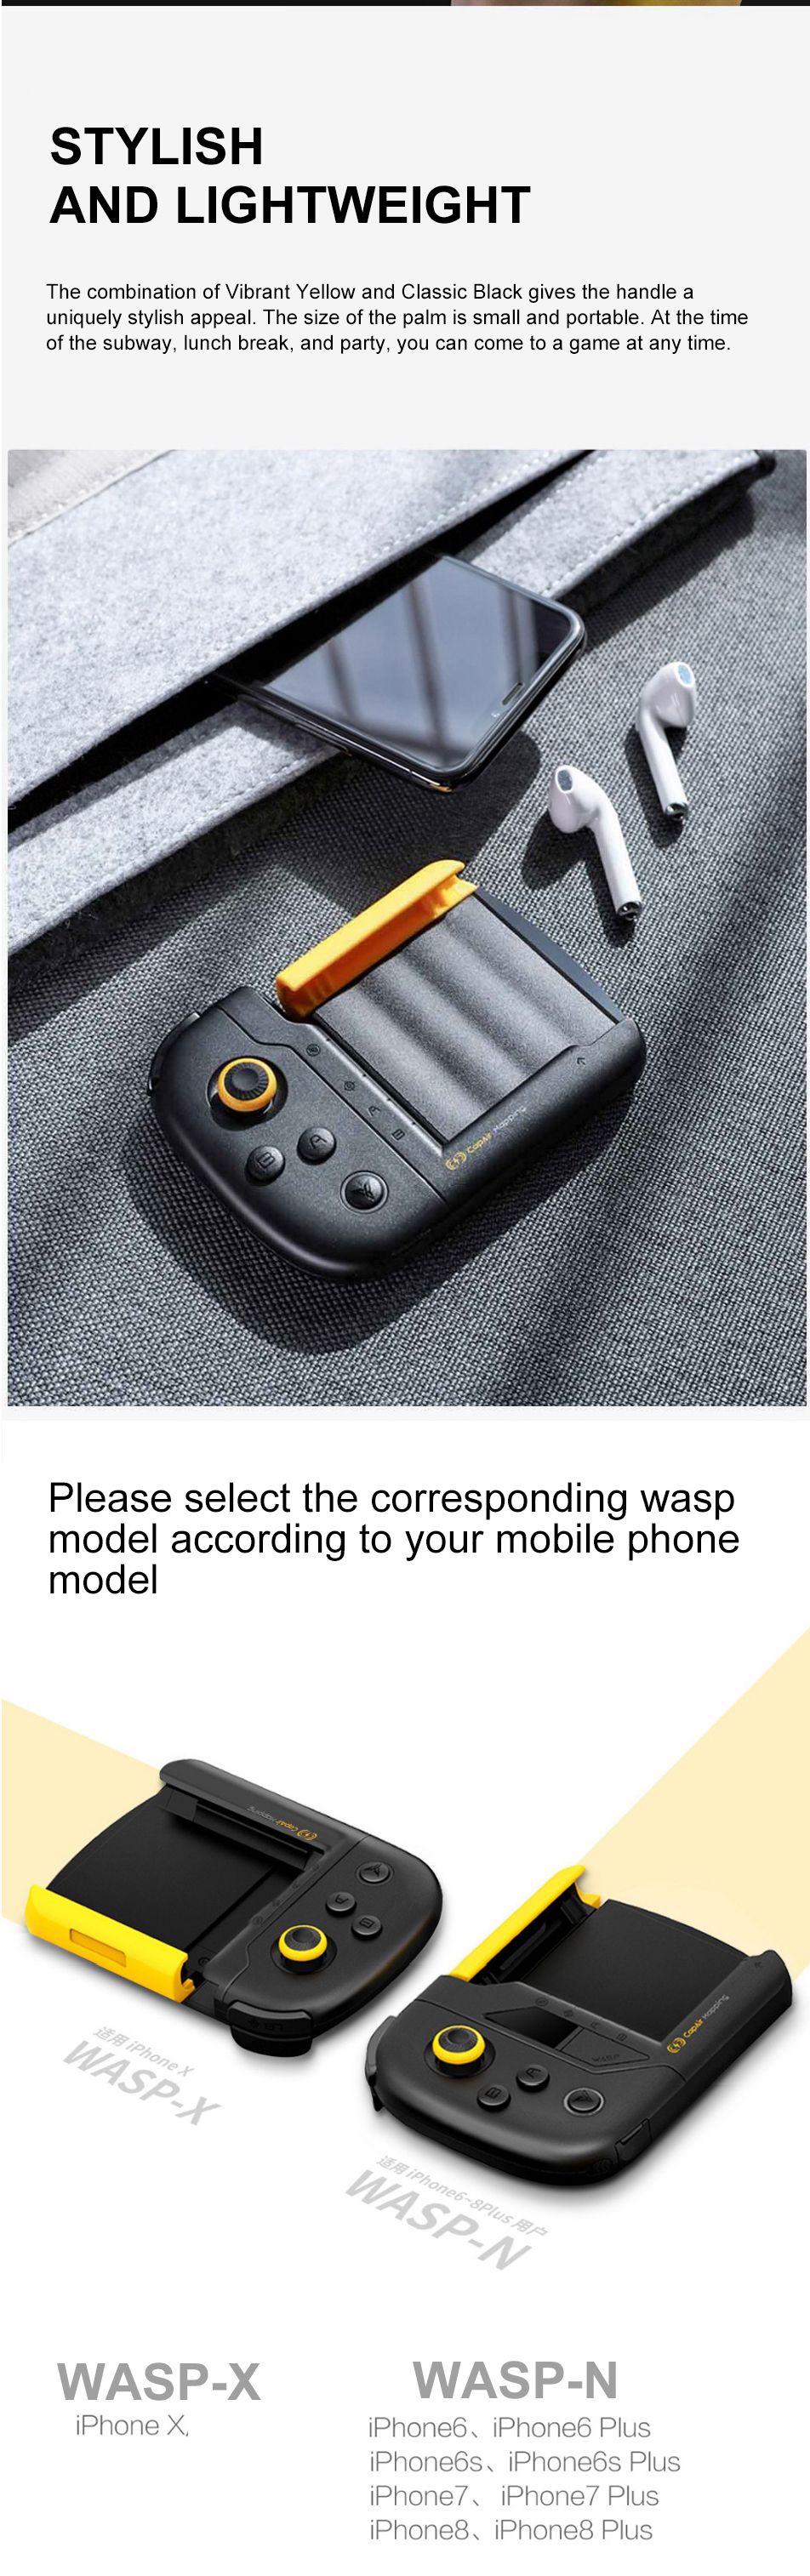 Flydigi-Wasp-Single-Hand-Physical-Connection-Joystick-Gamepad-with-Right-Fengci-Fire-Trigger-for-IOS-1406549